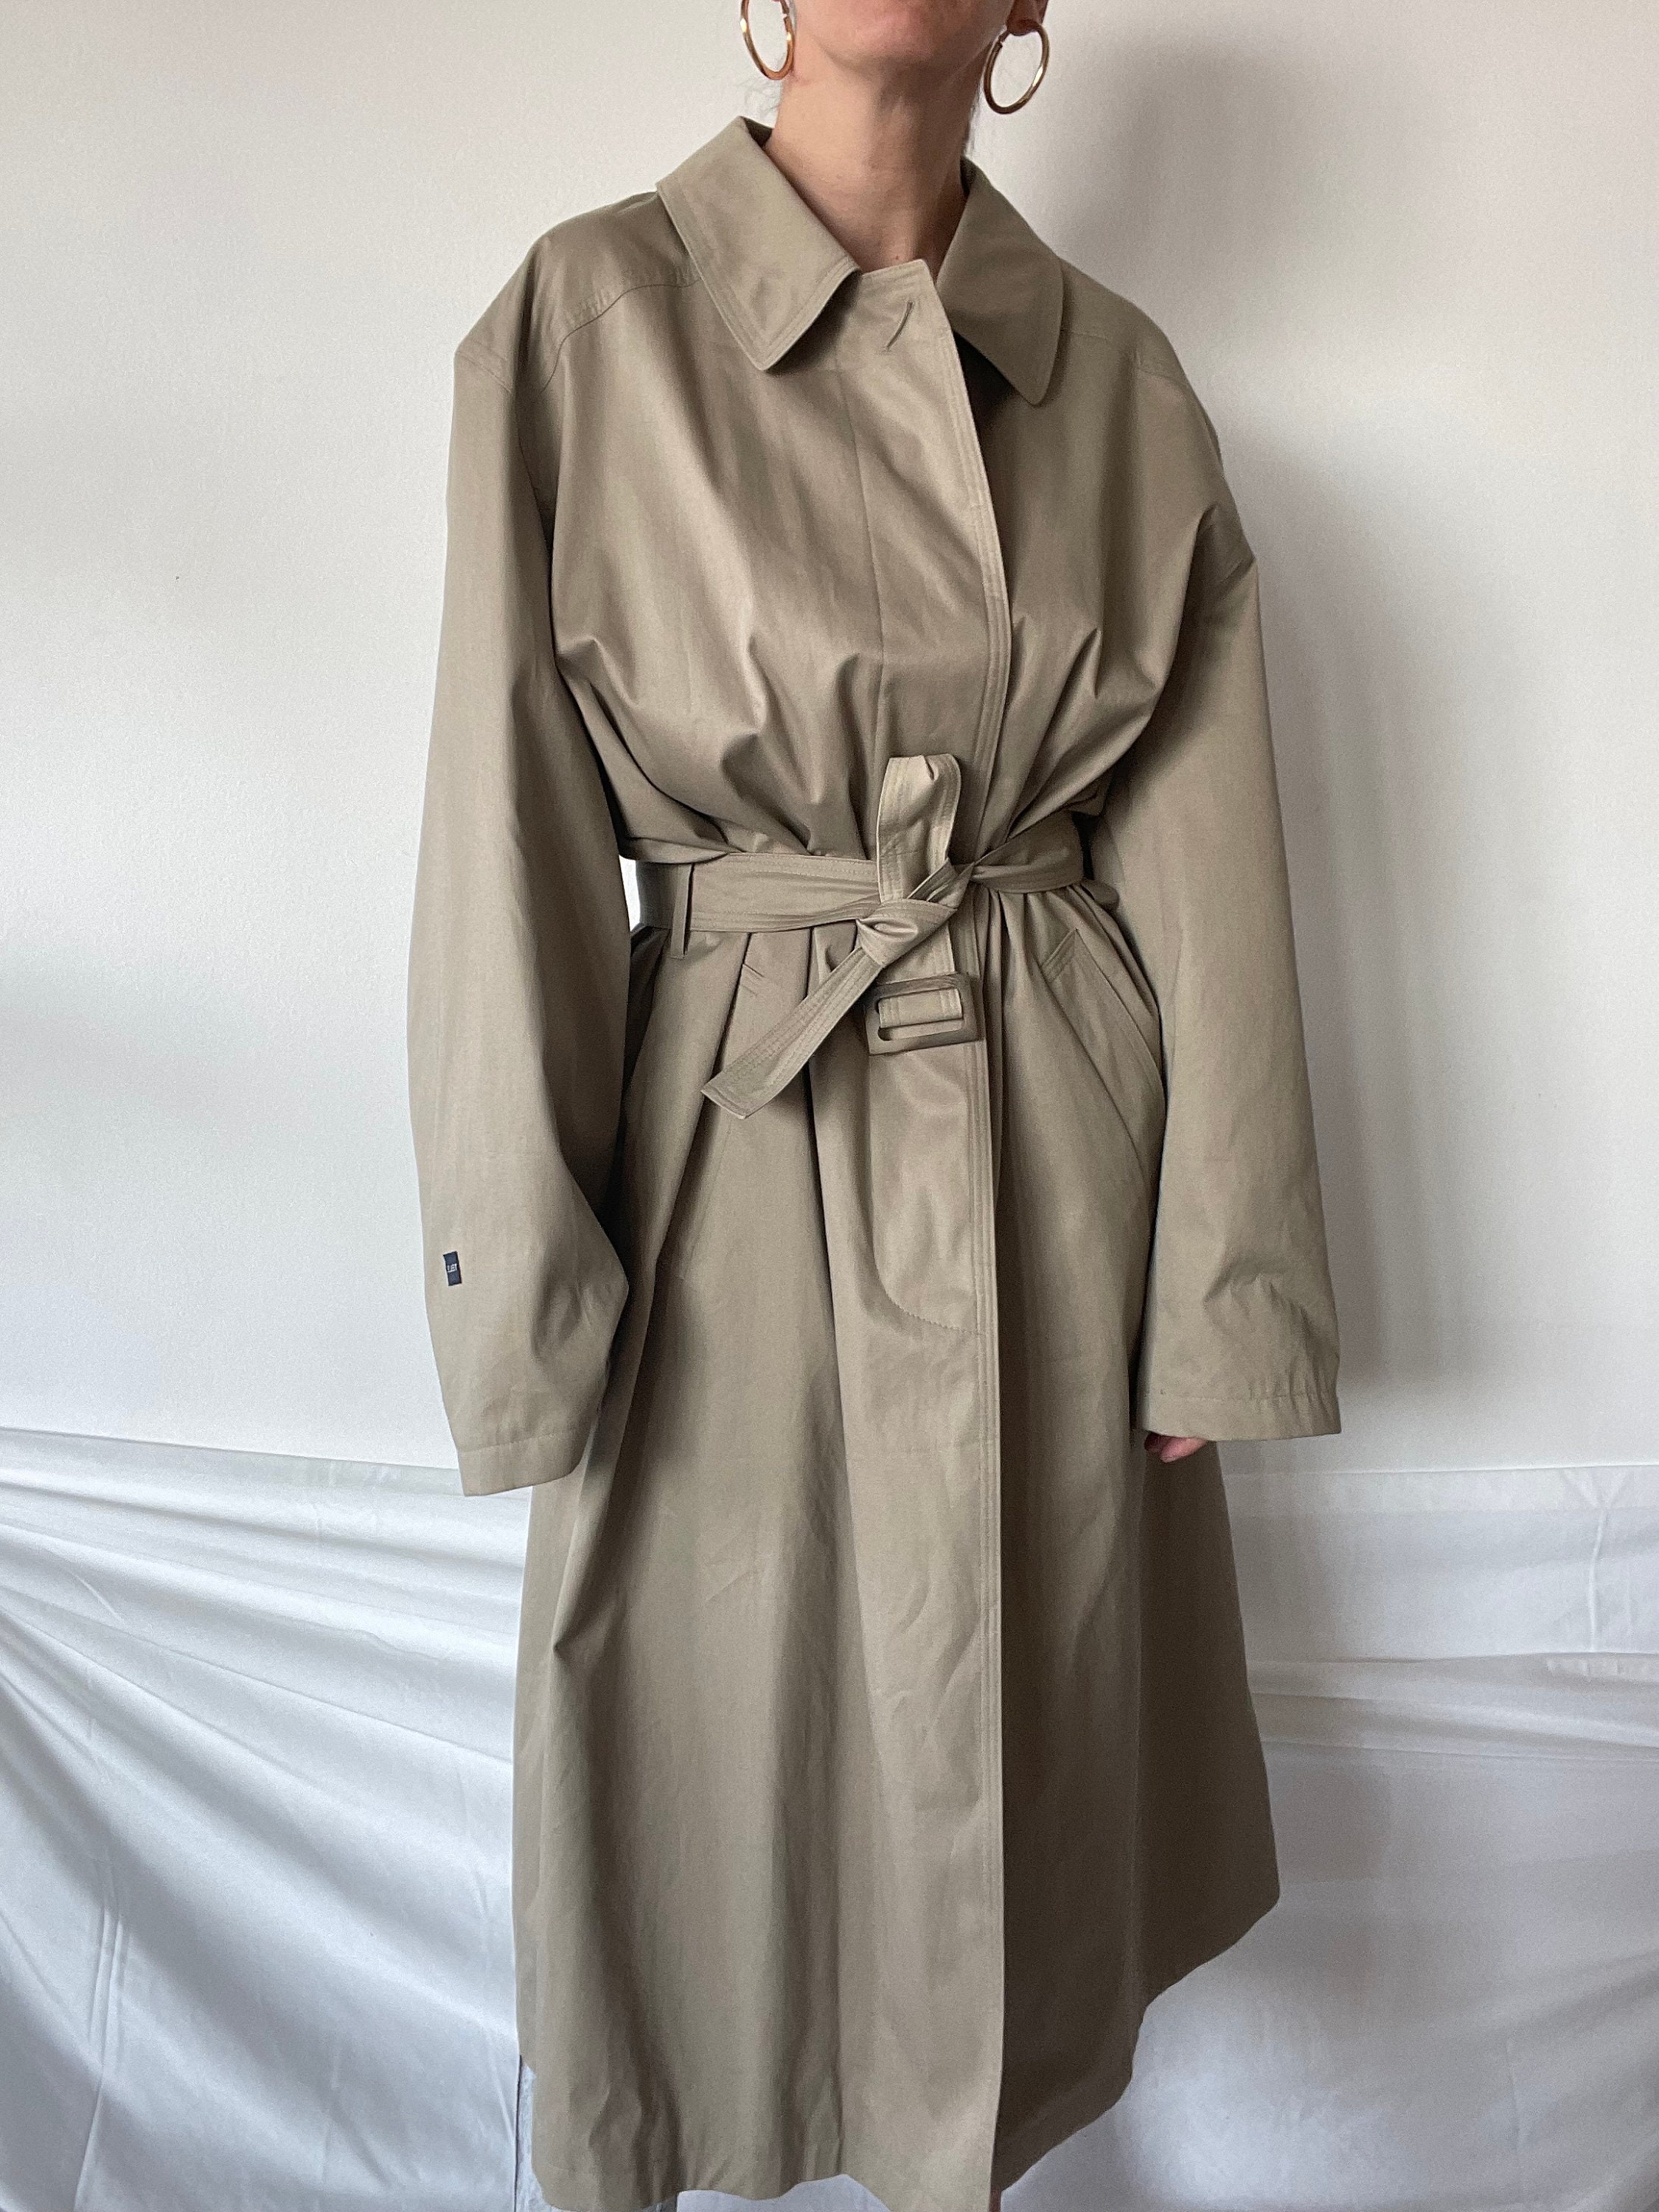 Vintage Mens Classic Trench Coat Maxi Beige Belt and Pockets - Etsy